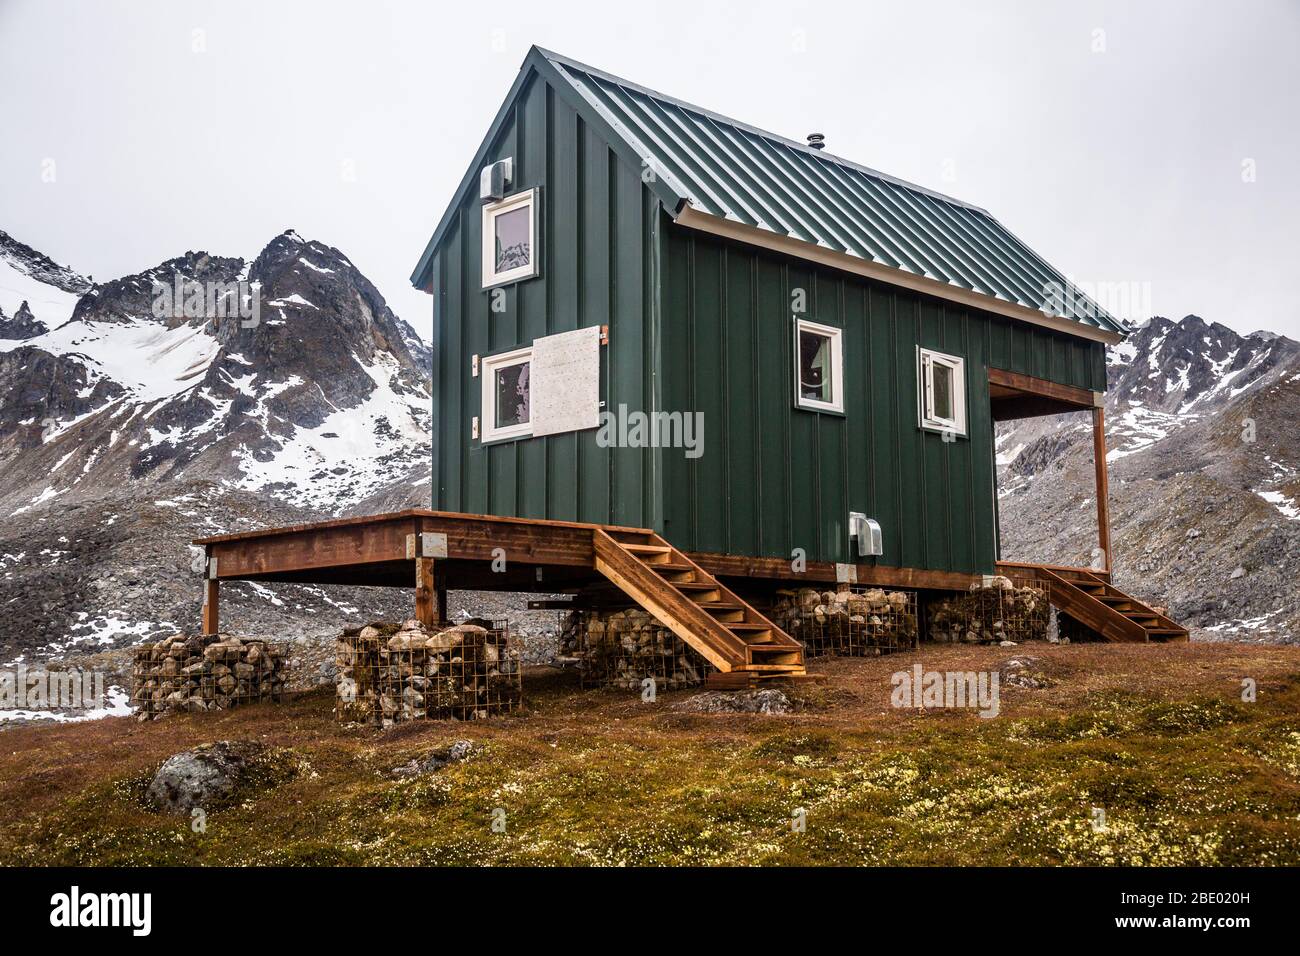 Alpine shelter for mountaineers and skiers to take refuge in the wild Alaskan mountains. Stock Photo